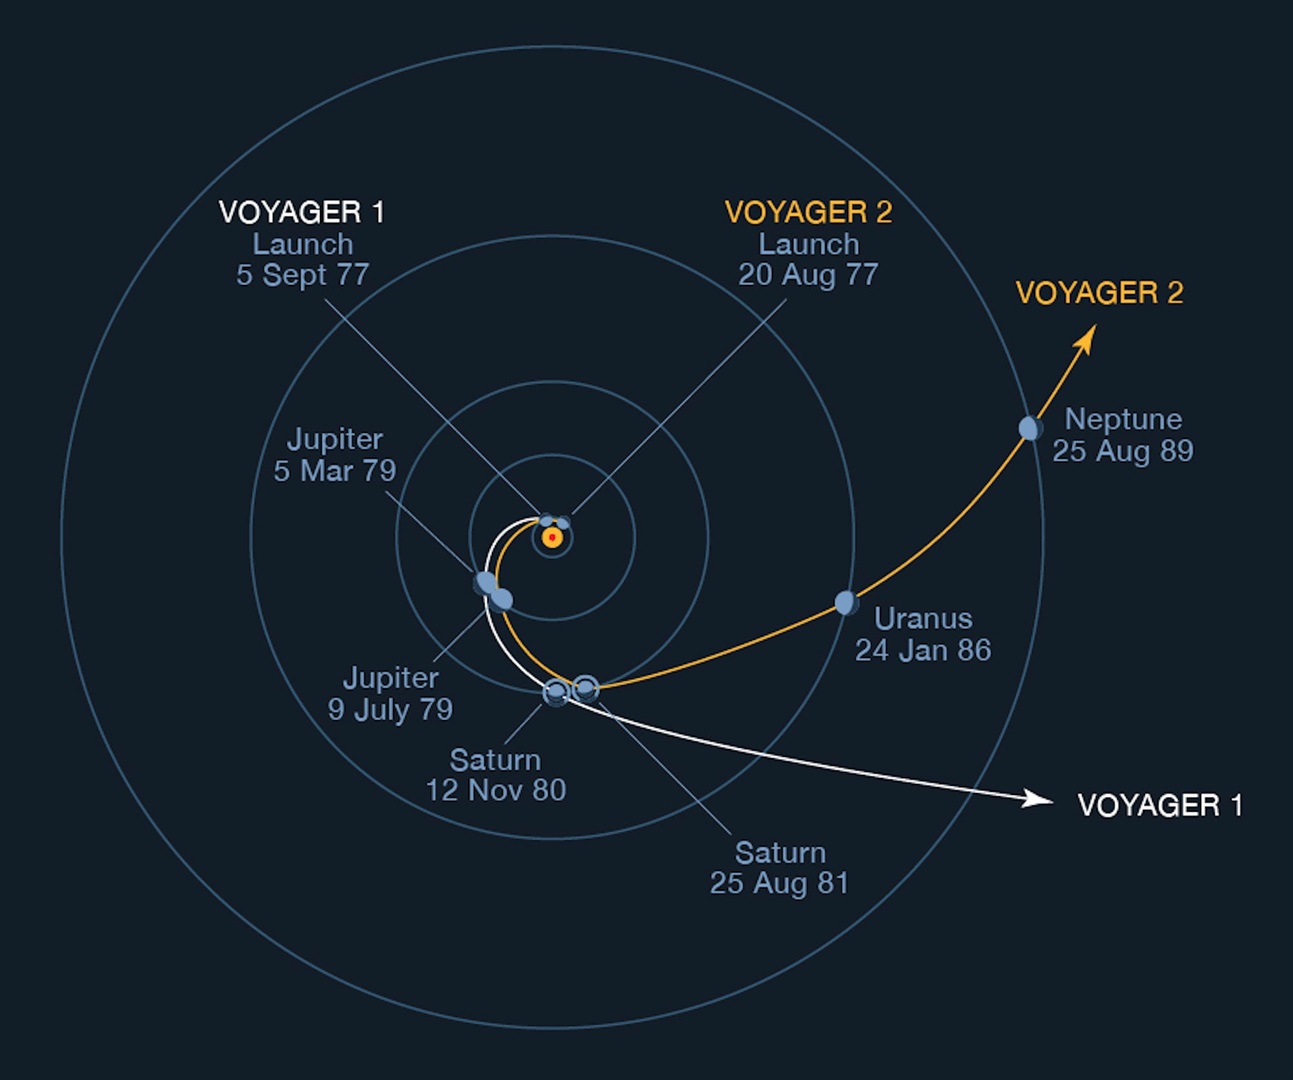 The voyager probes wizzed through the solar system taking unprecedented pictures. NASA